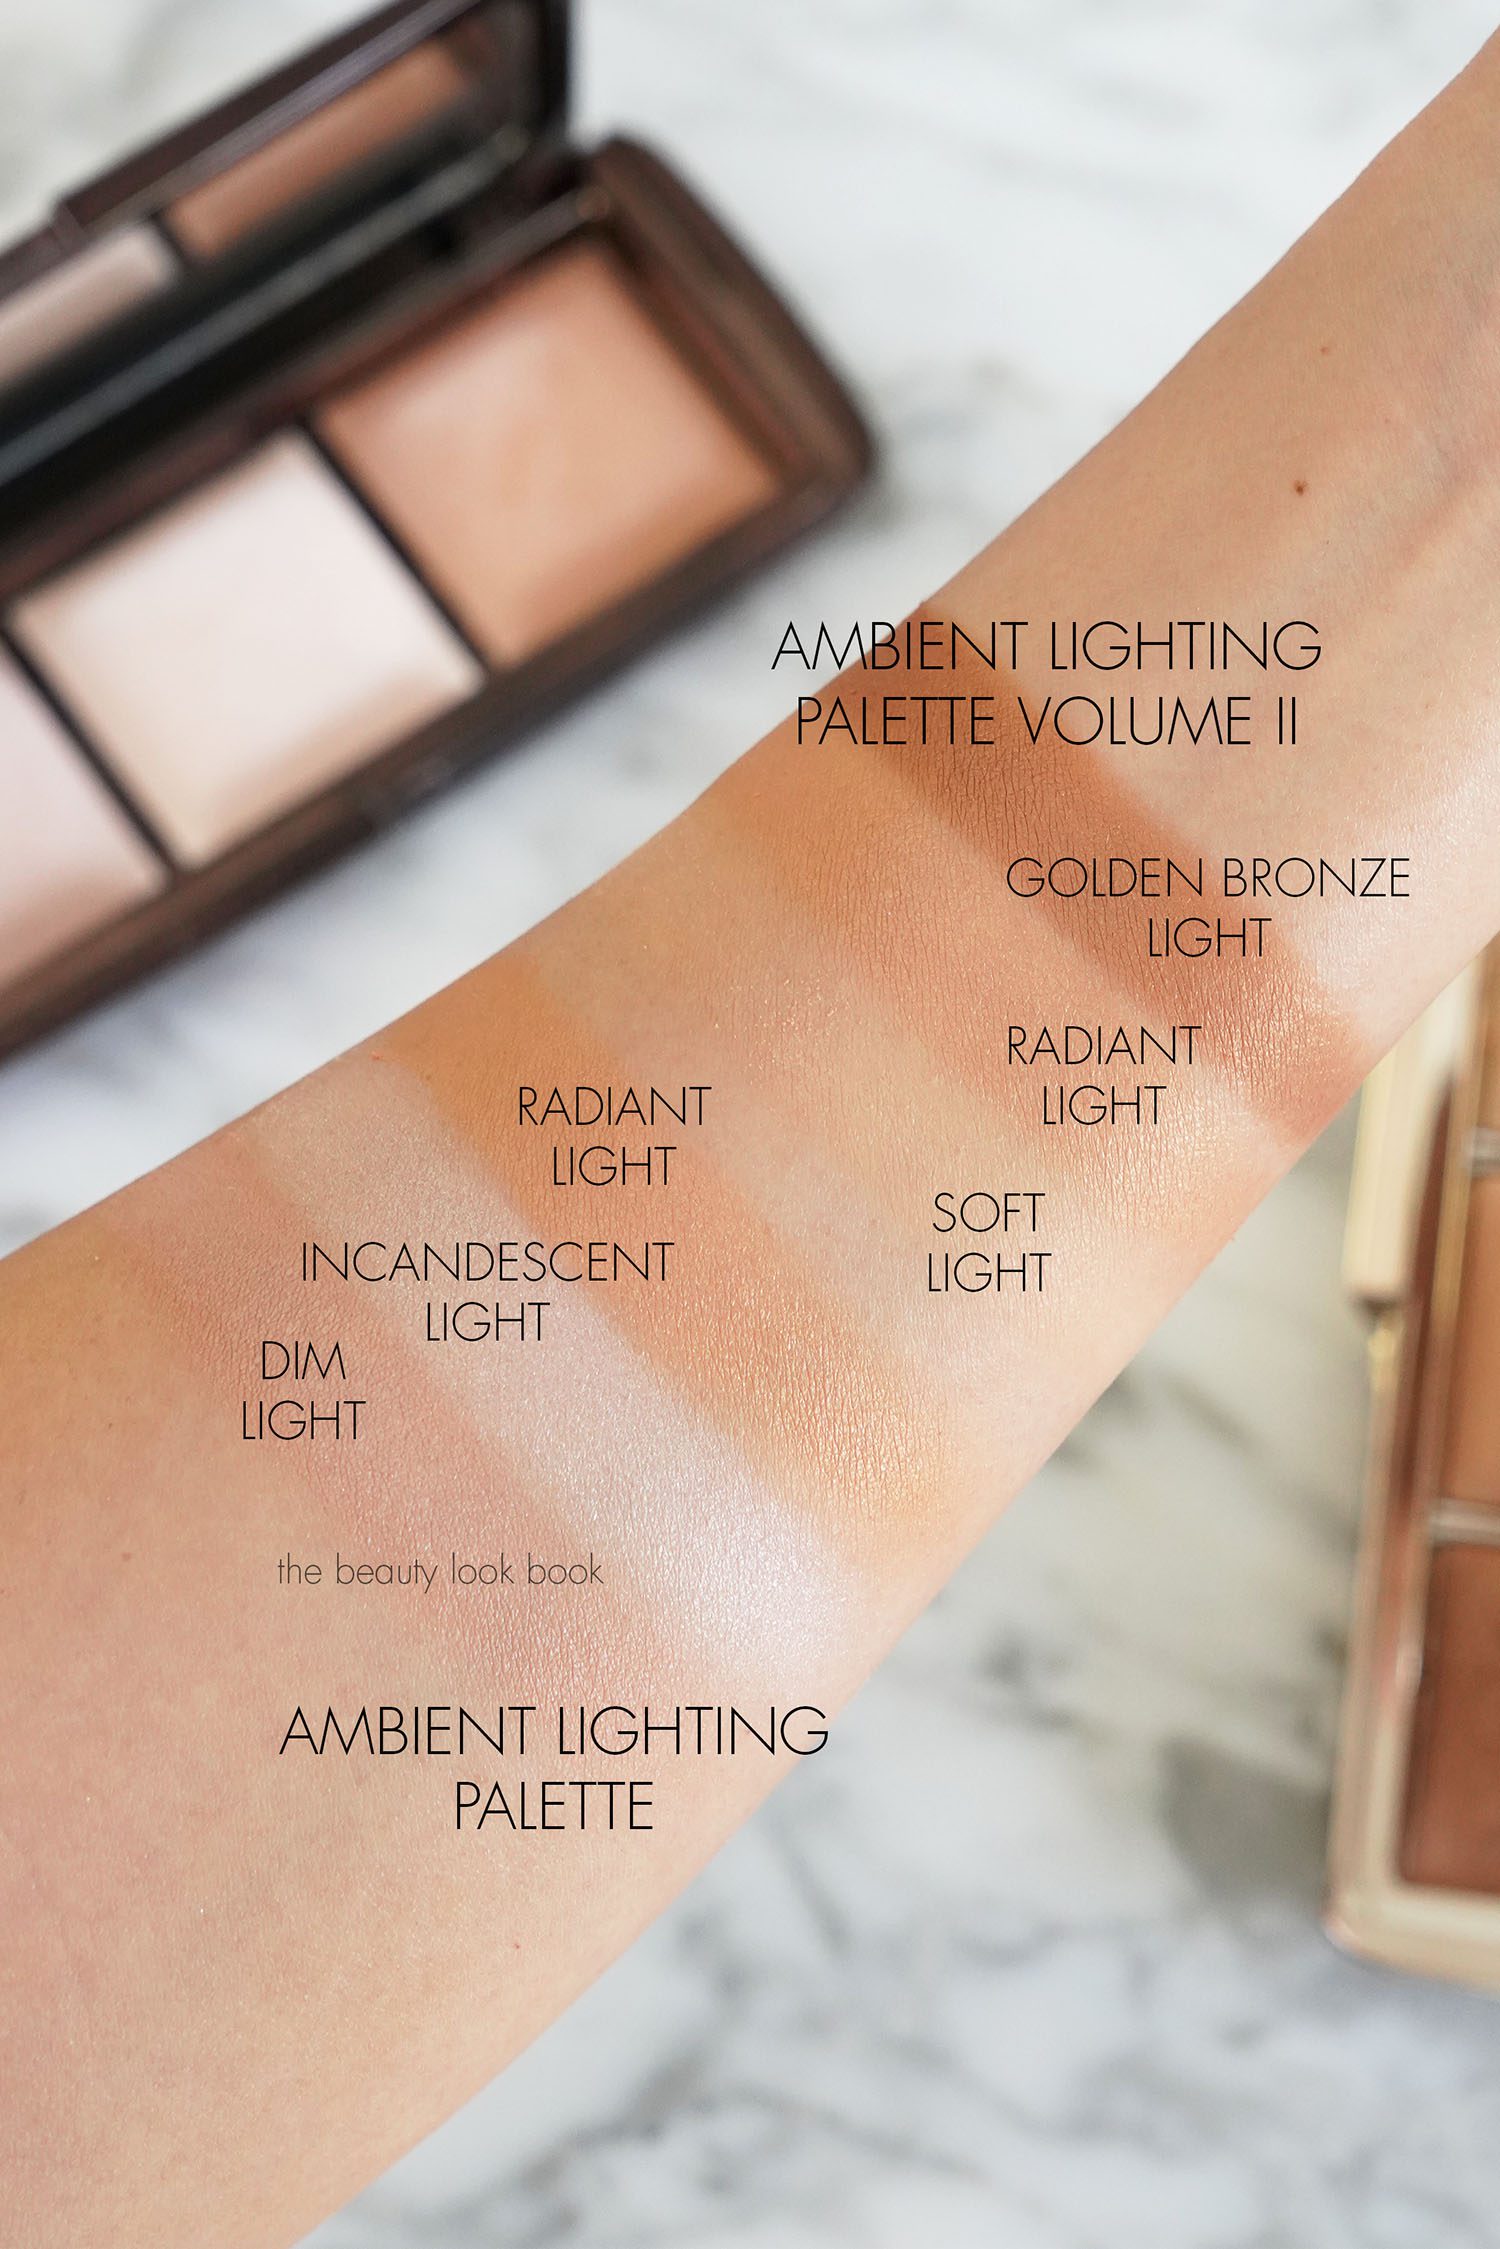 stege stenografi Yoghurt Makeup Favorites for a Natural Flawless Glow - The Beauty Look Book